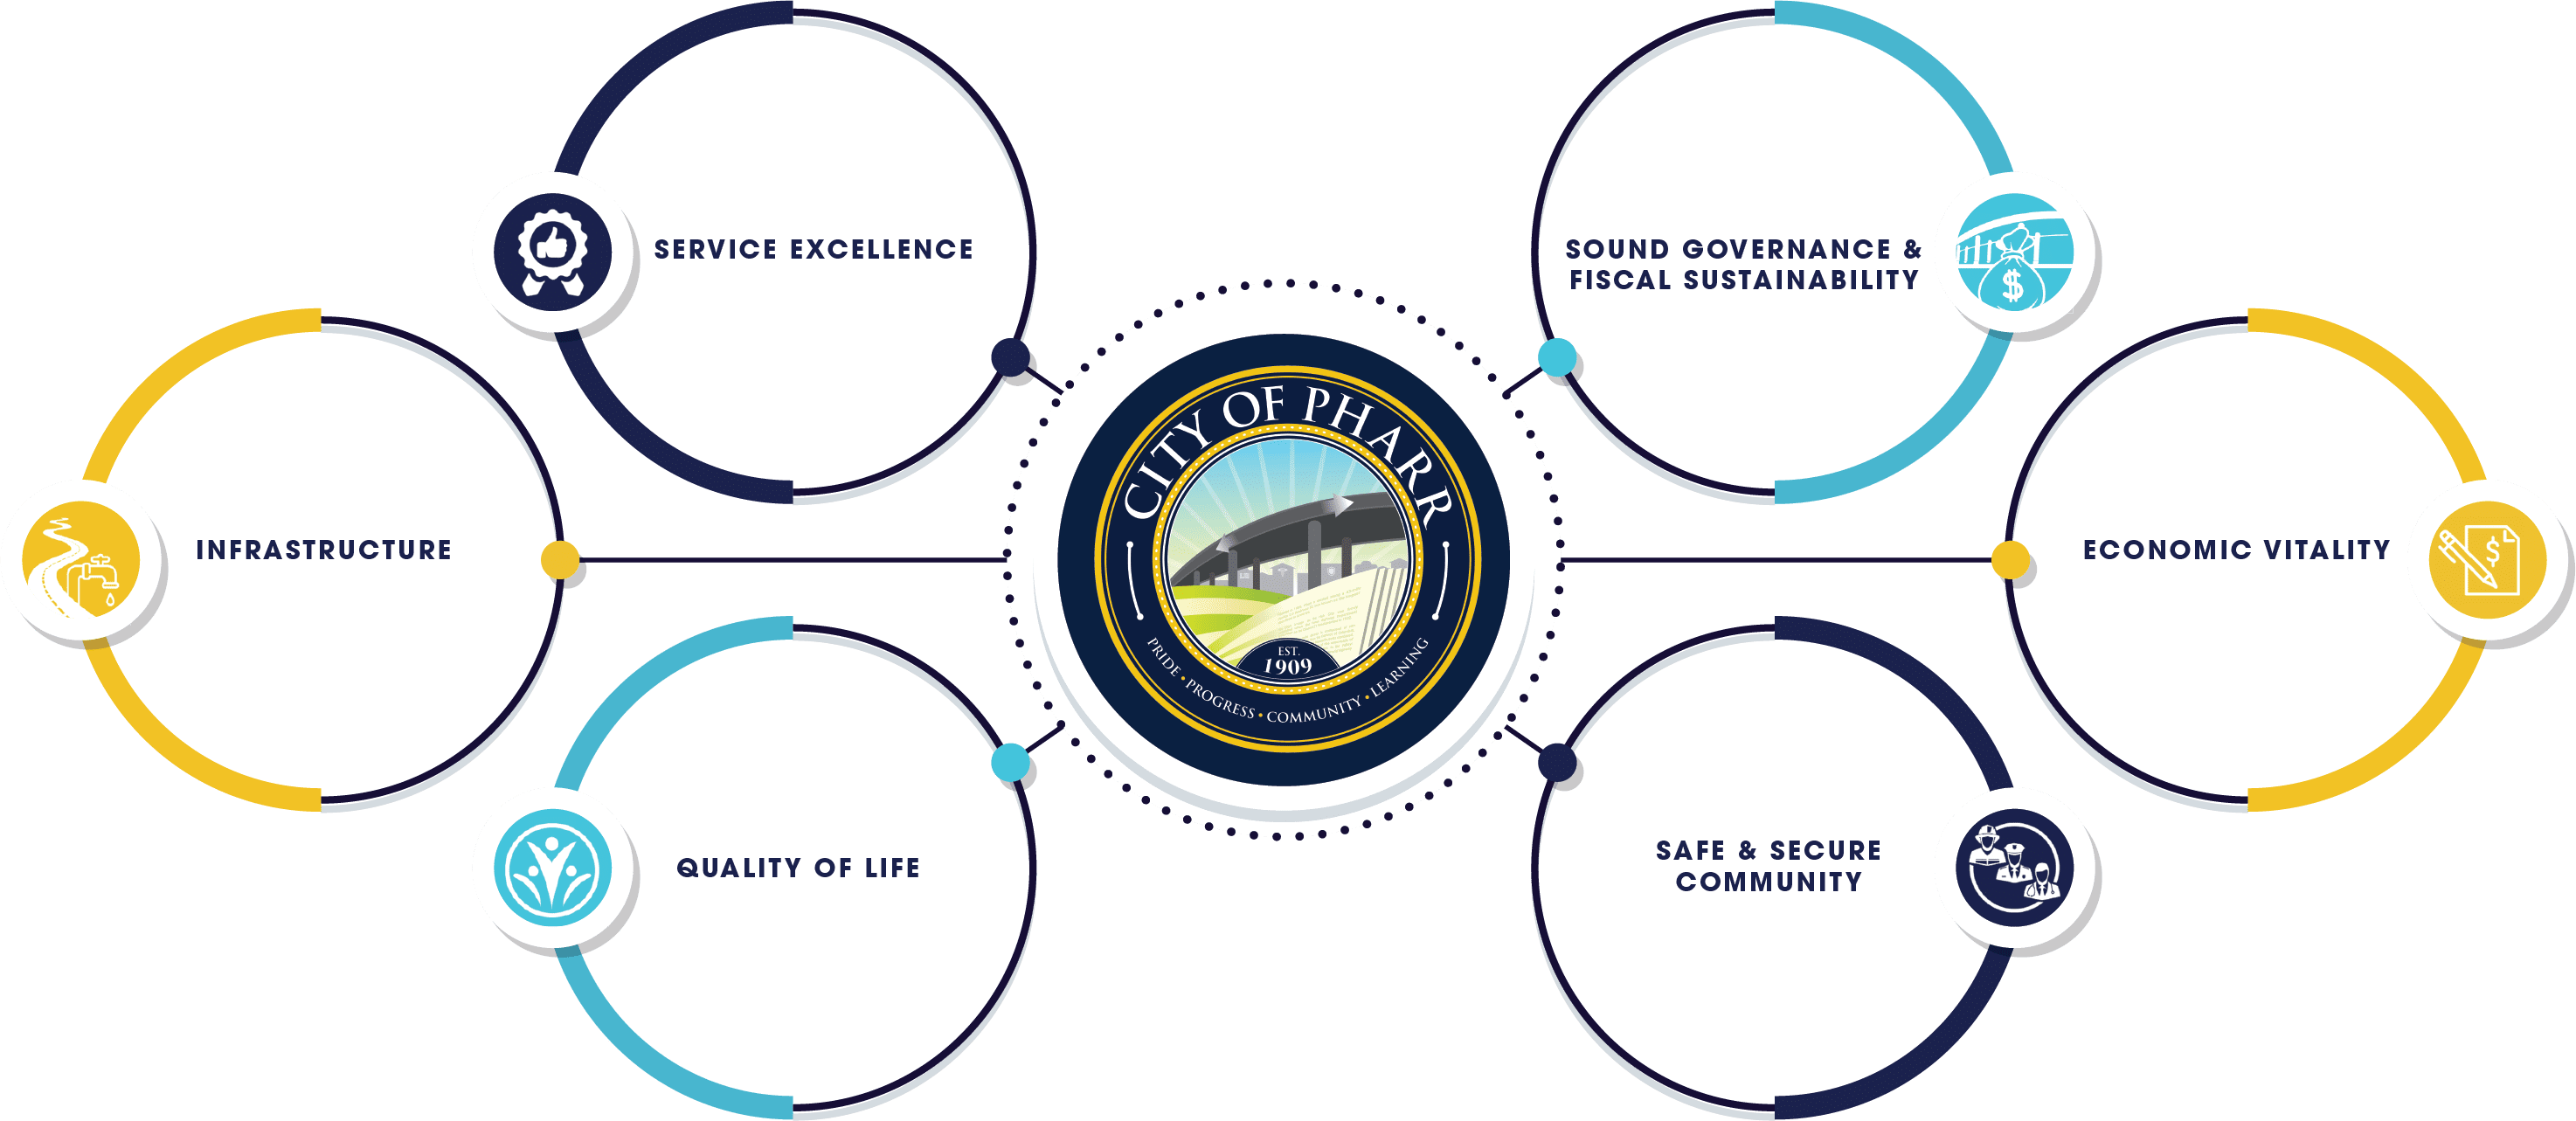 Strategic Objectives: Infrastructure, Service Excellence, Quality of Life, City of Pharr Logo, Sound Governance & Fiscal Sustainability, Safe & Secure Community, Economic Vitality.